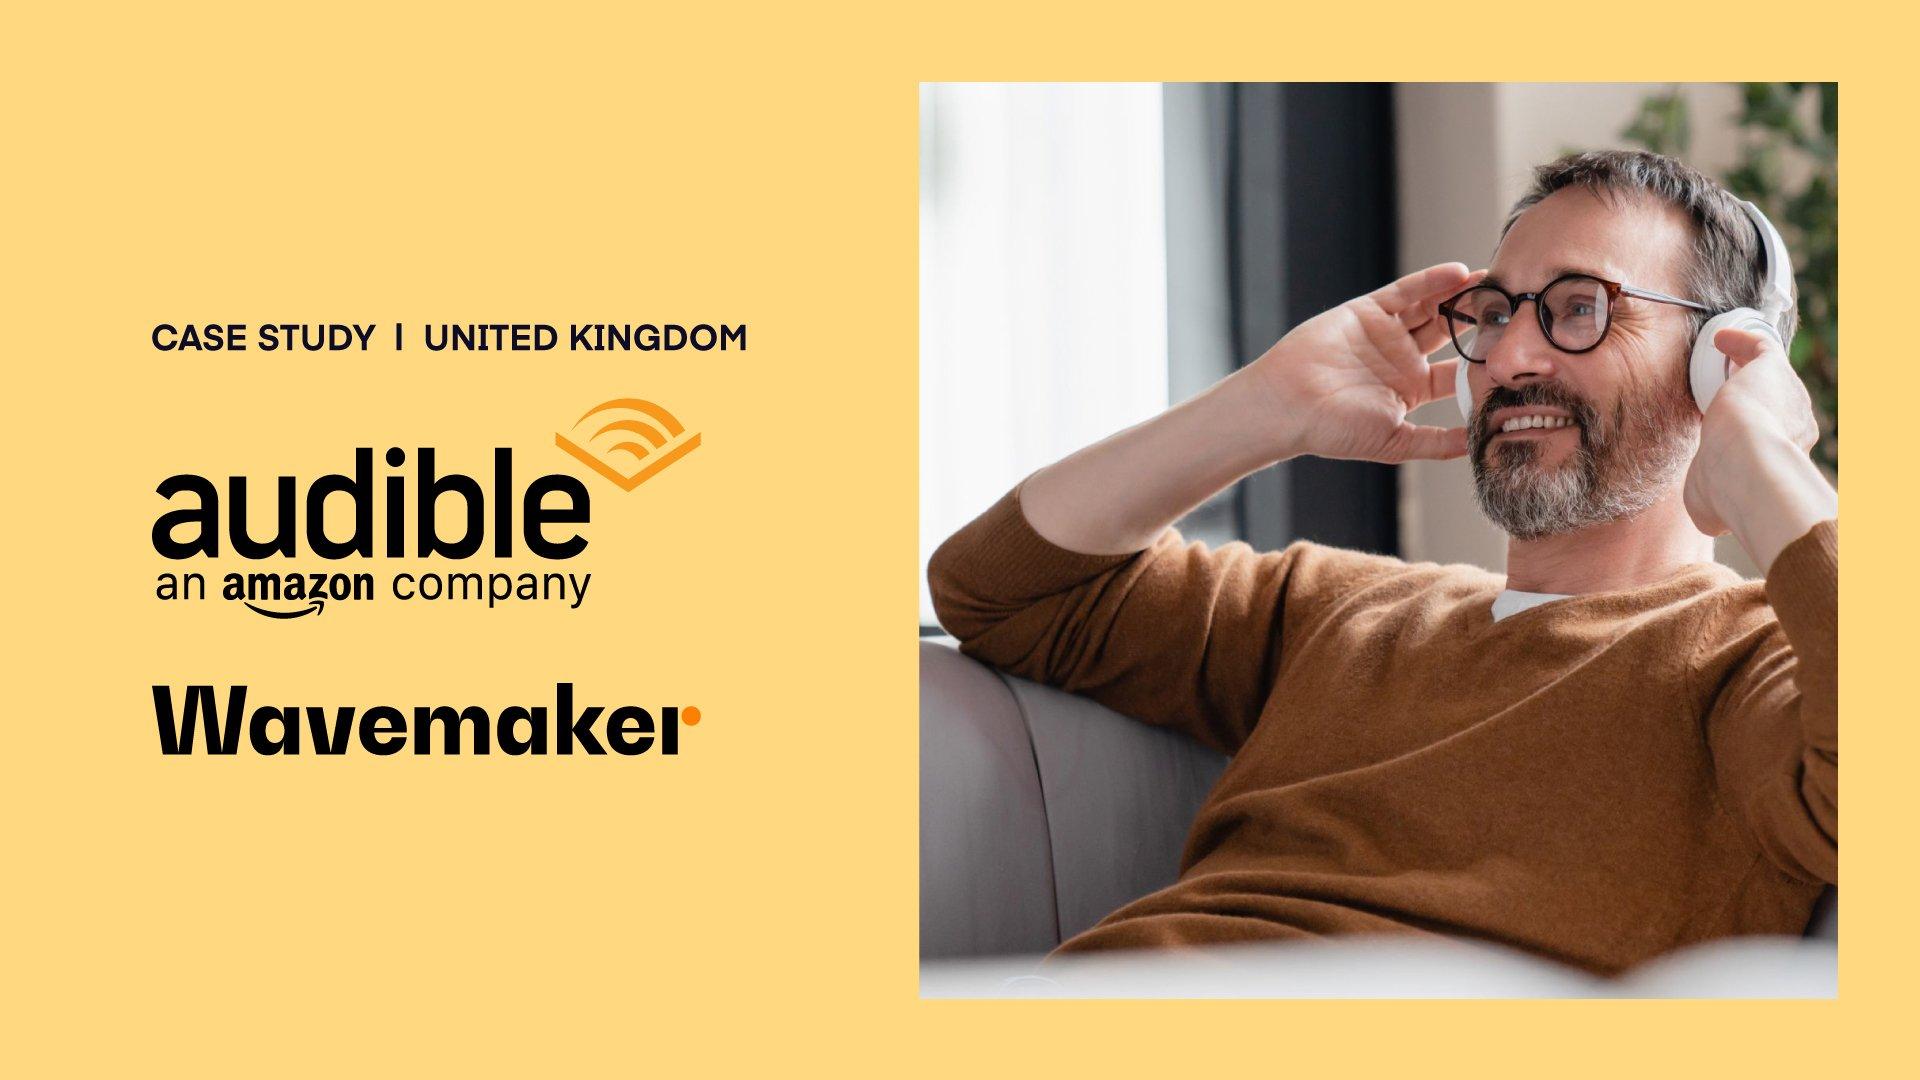 Yellow background with an image of a man listening to headphone and text to the left saying "CASE STUDY | UNITED KINGDOM | AUDIBLE + WAVEMAKER"